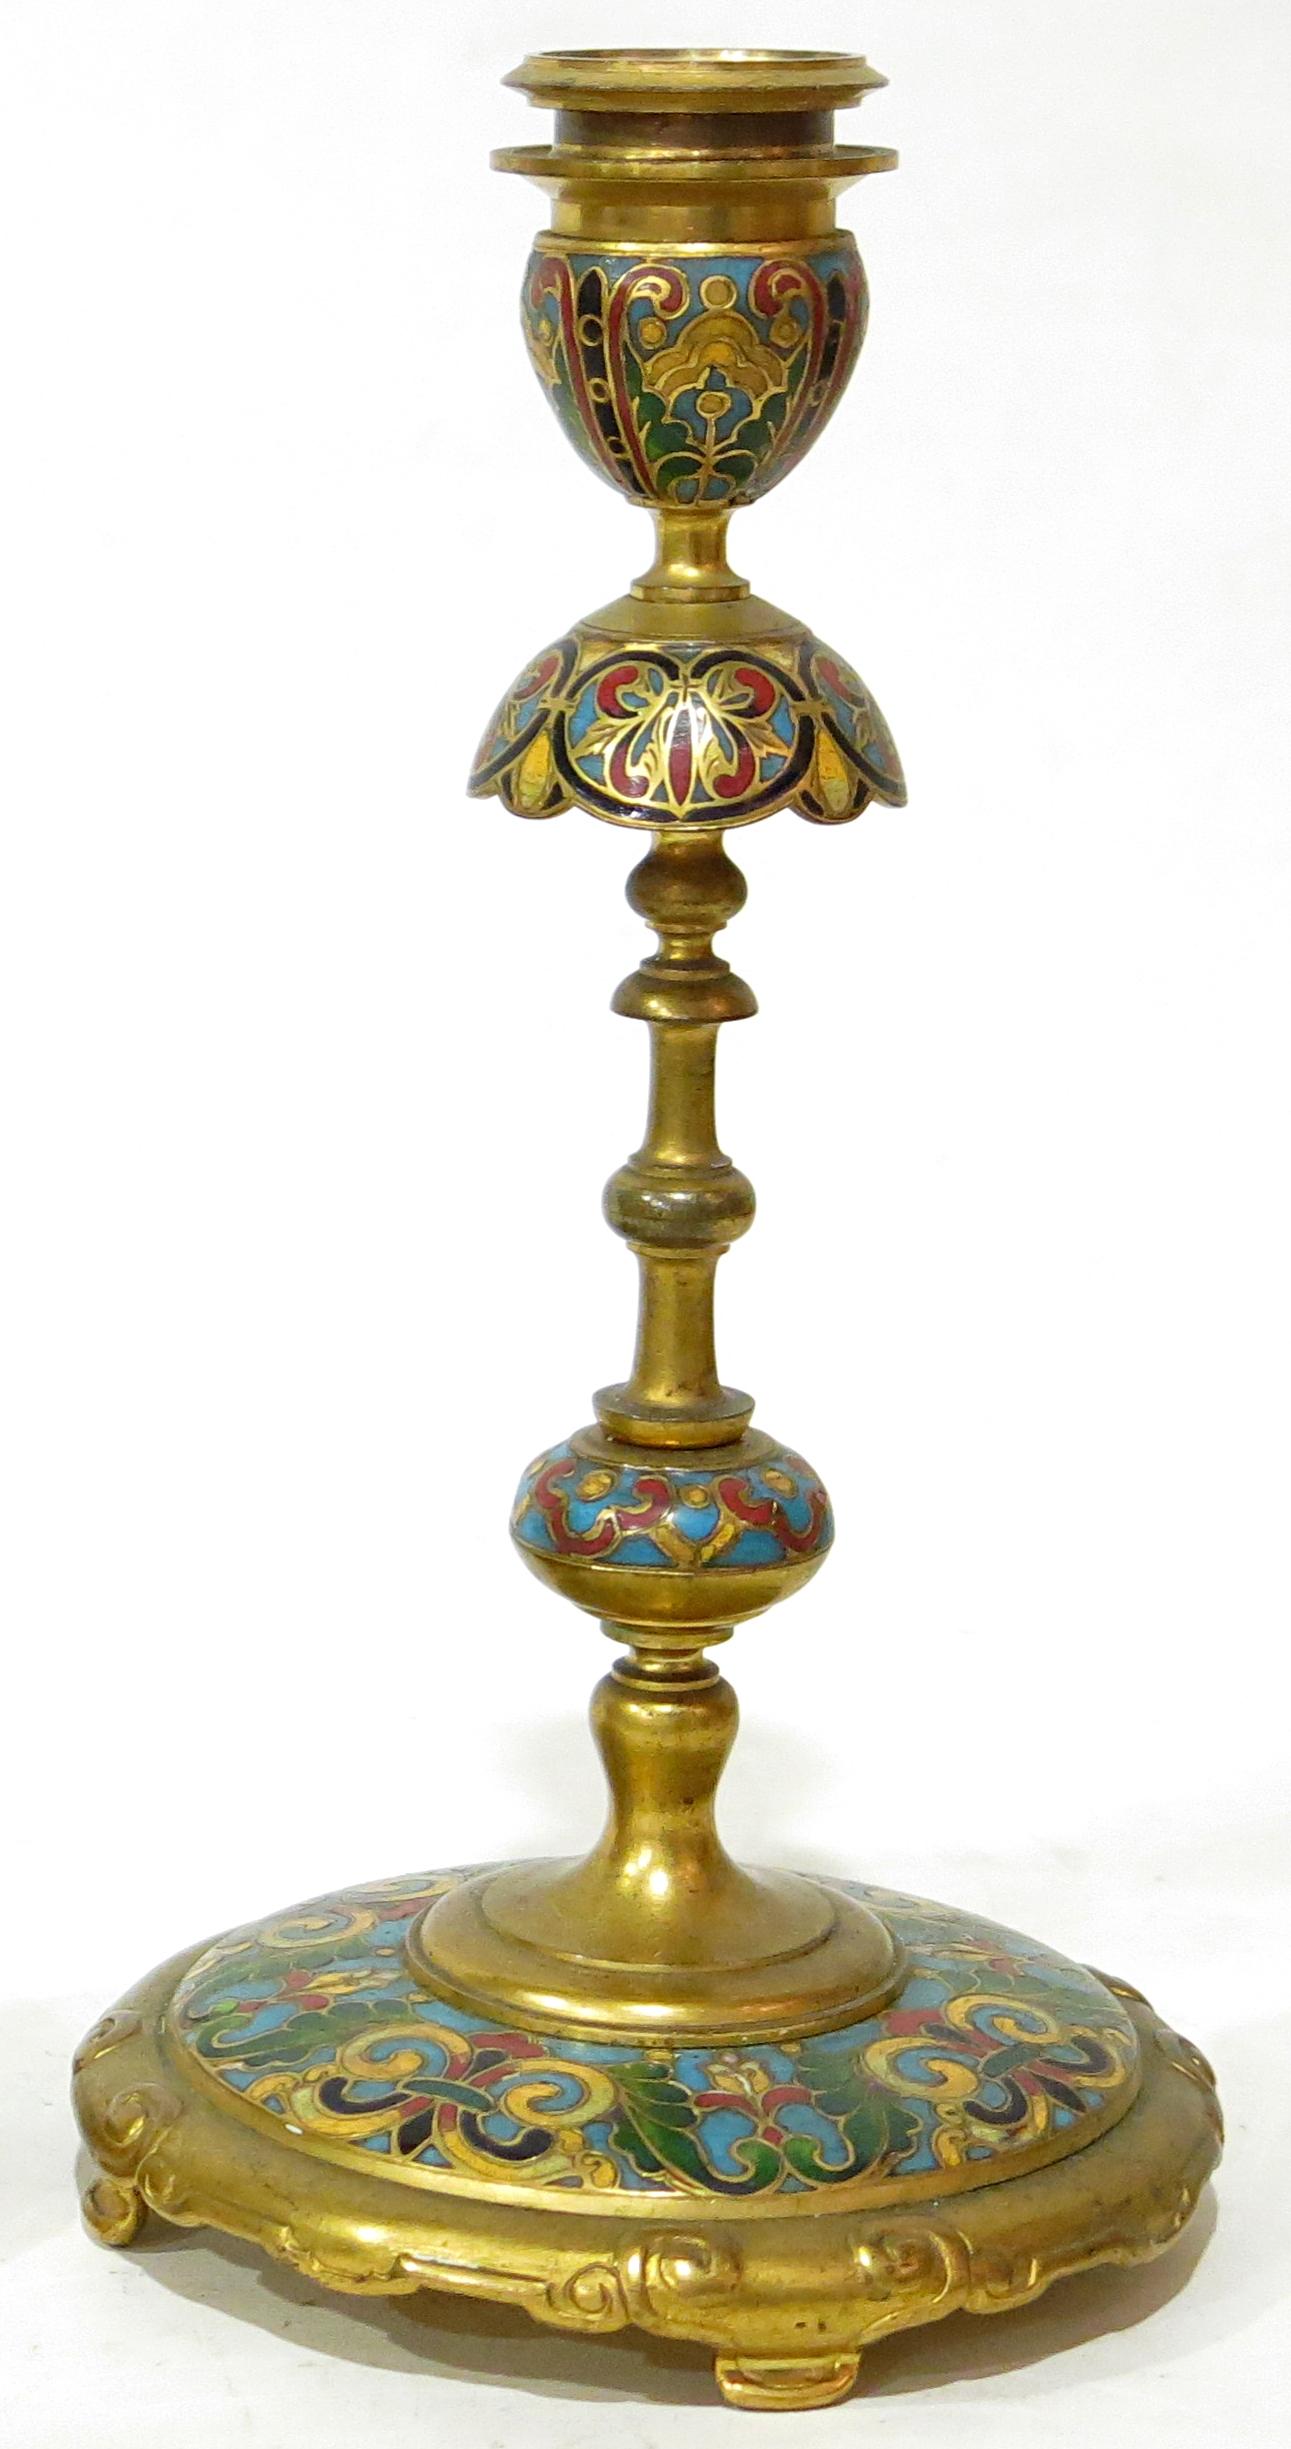 Very fine pair of candlesticks by the prestigious Maison Barbedienne, manufacturer, editor and founder. These two candlesticks are made out of gilt bronze and champlevé enamel with really fine polychrom effects. Turned candlesticks decorated with